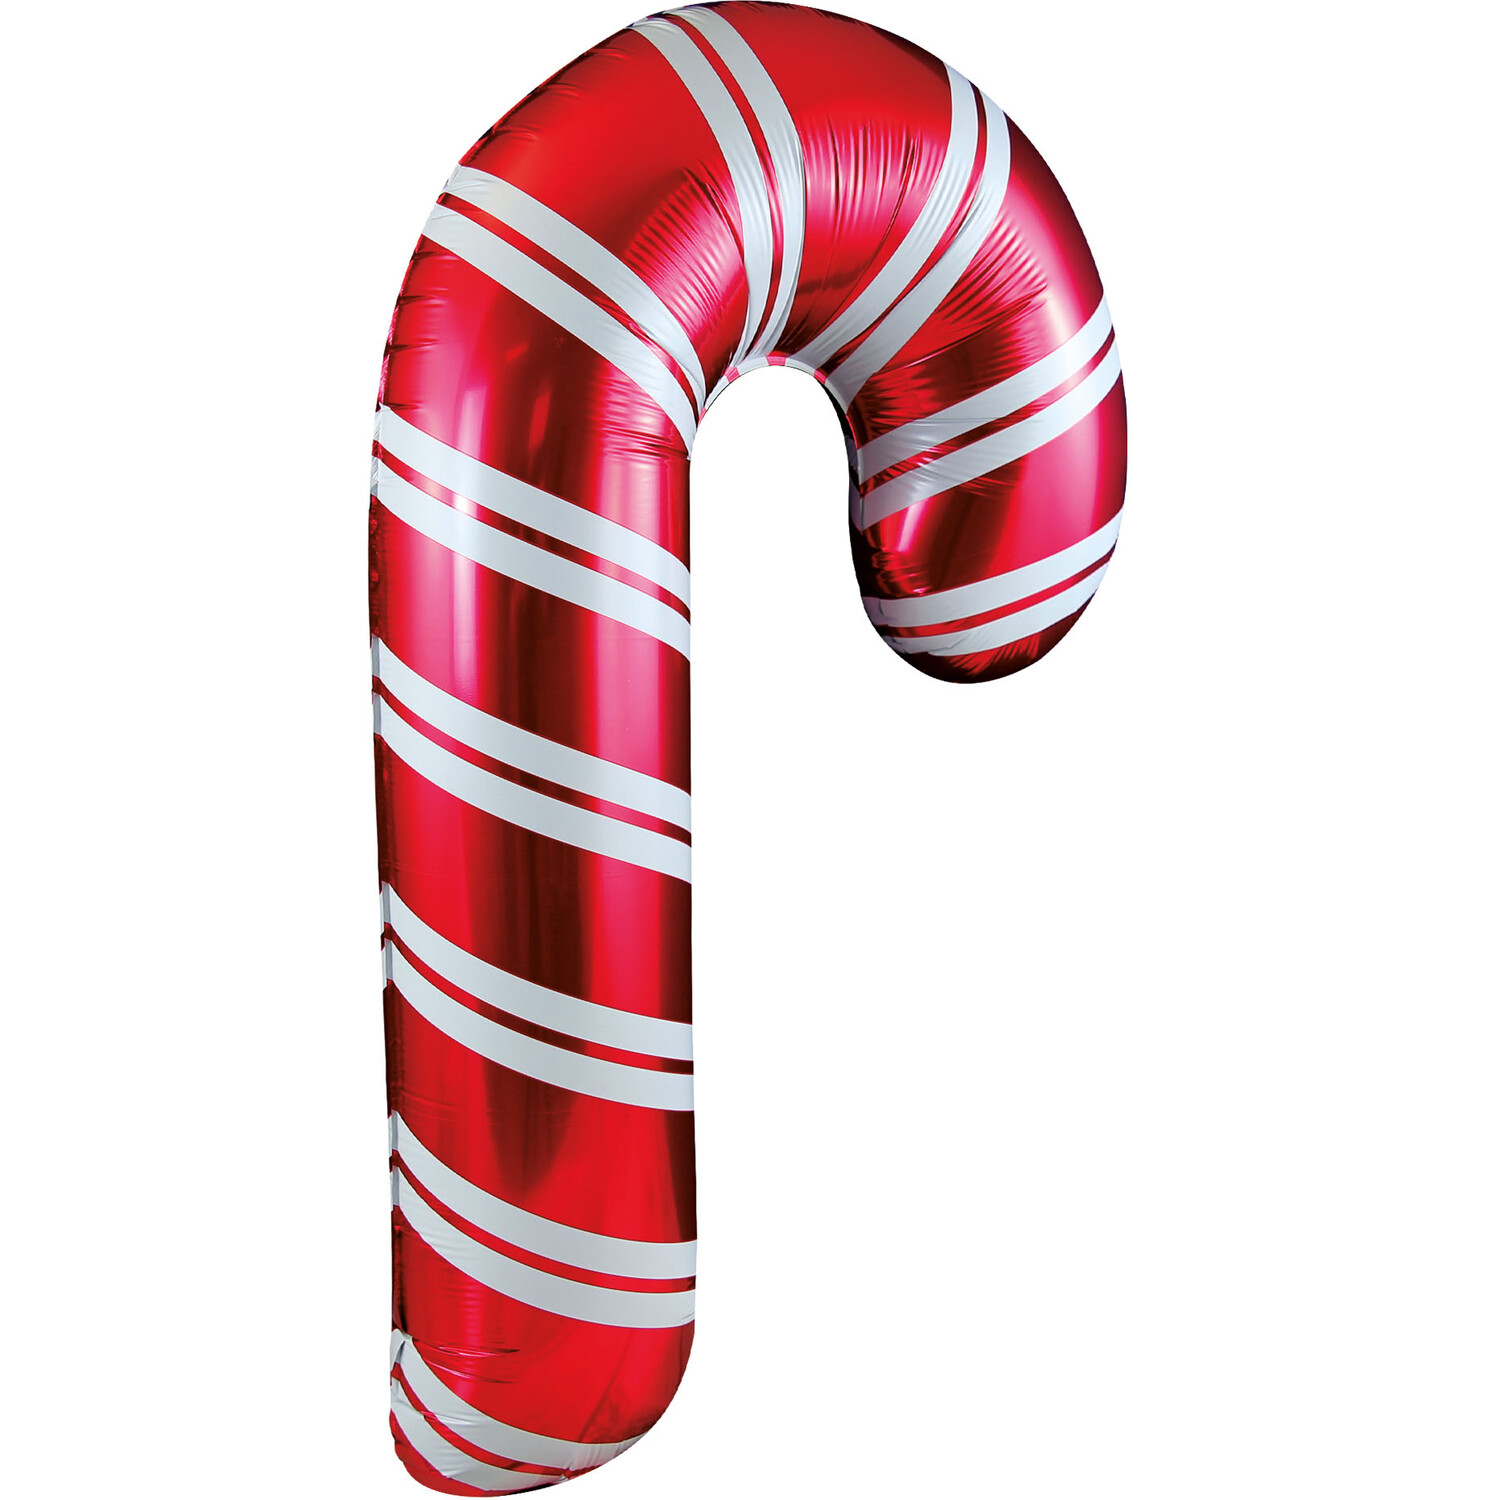 Candy Cane Balloon - Red Image